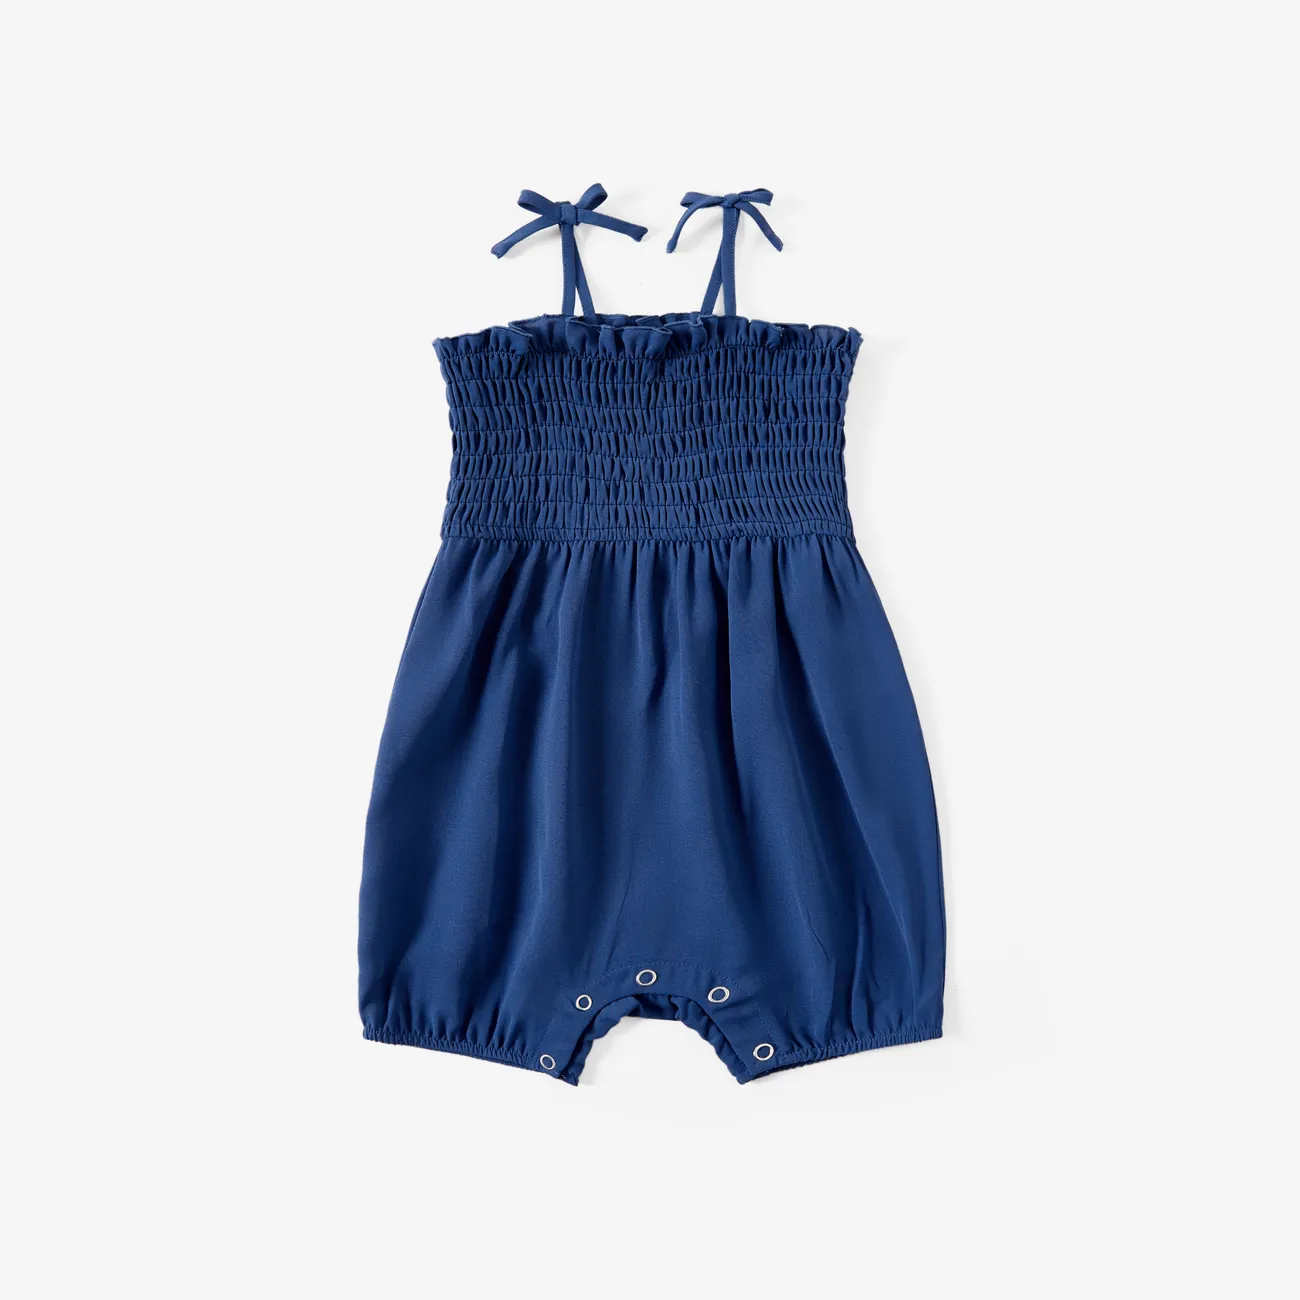 Mommy and Me Matching Navy Blue Shirred Top Ruffle Hem Strap Romper Bluish Grey big image 1